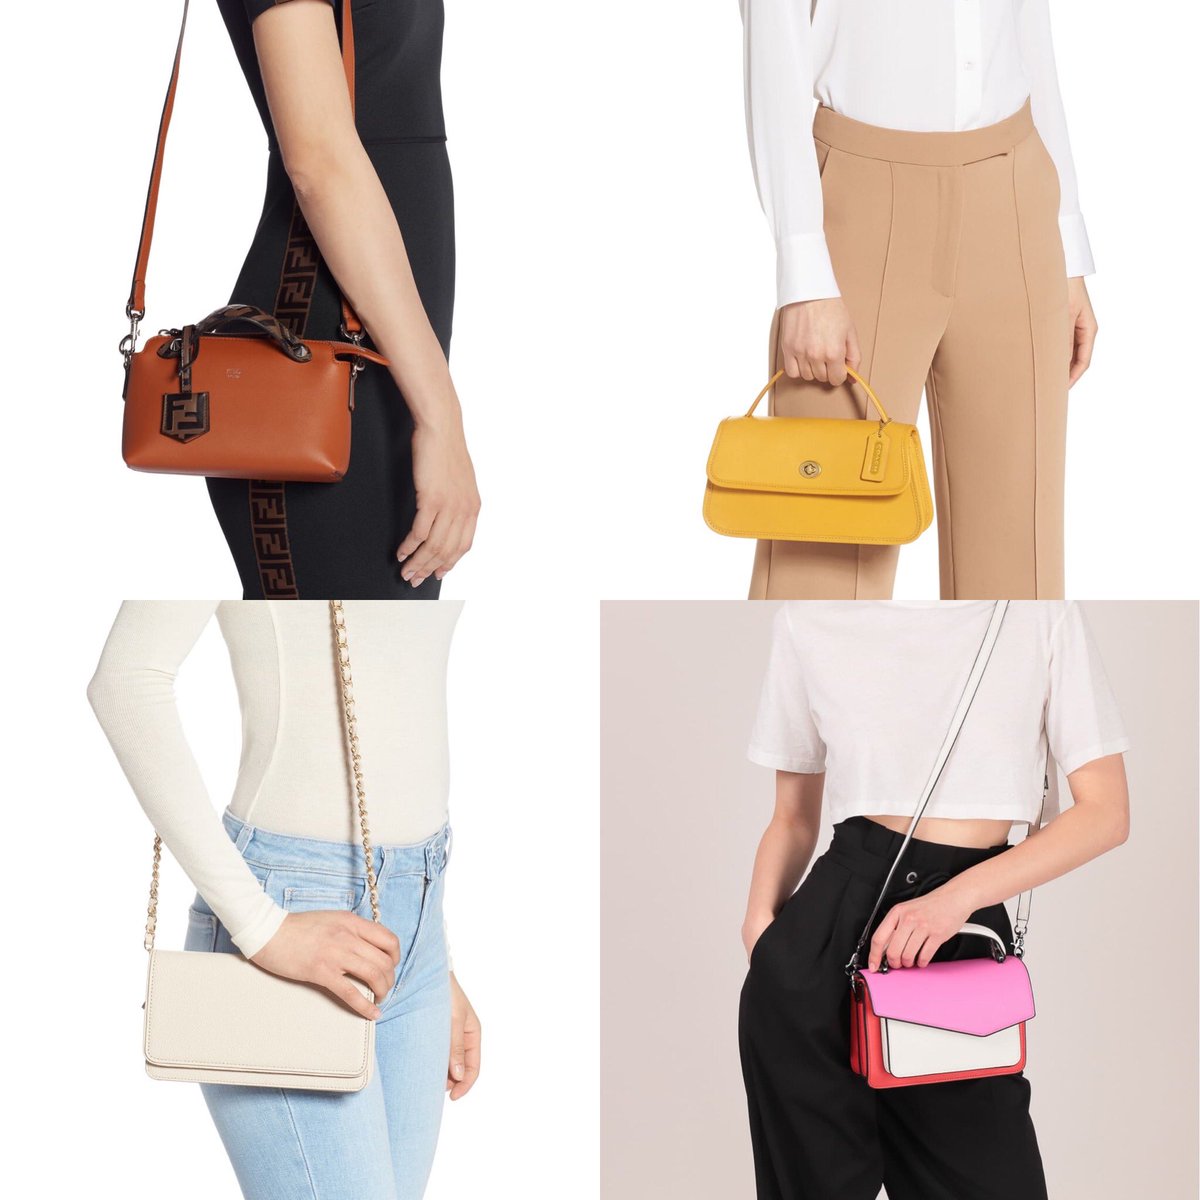 Tiny bag trend from @Nordstrom #springtrends #tinybag #Fashionista #styleinspo #nordstromfinds #stylemaker